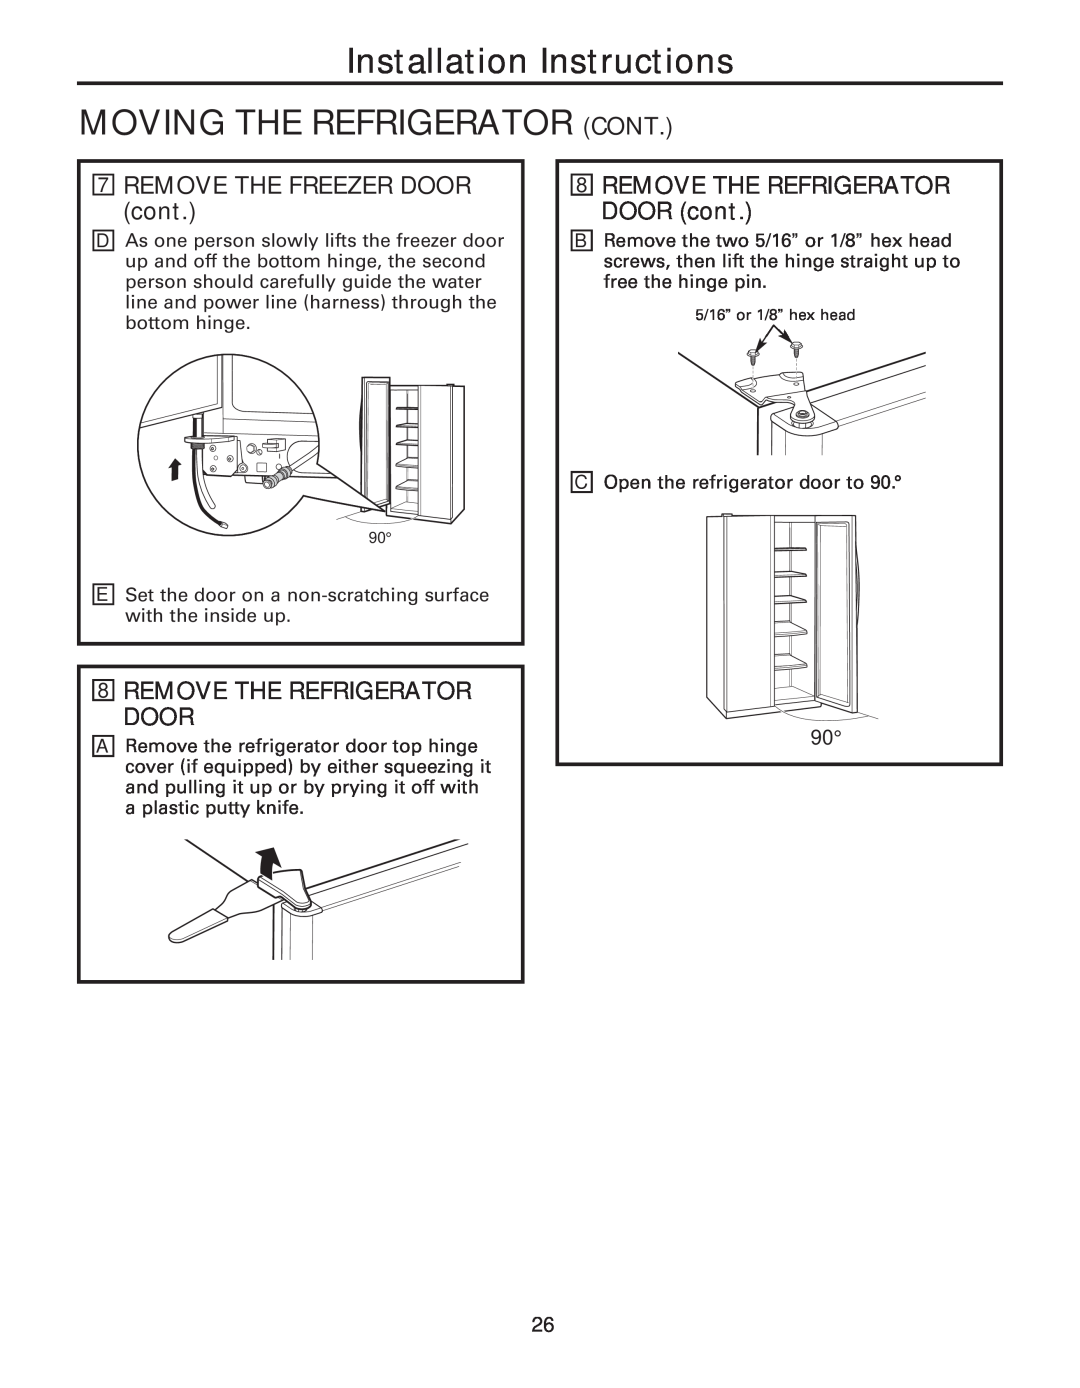 GE 49-60637, 200D8074P043 manual Installation Instructions MOVING THE REFRIGERATOR CONT, REMOVE THE FREEZER DOOR cont 